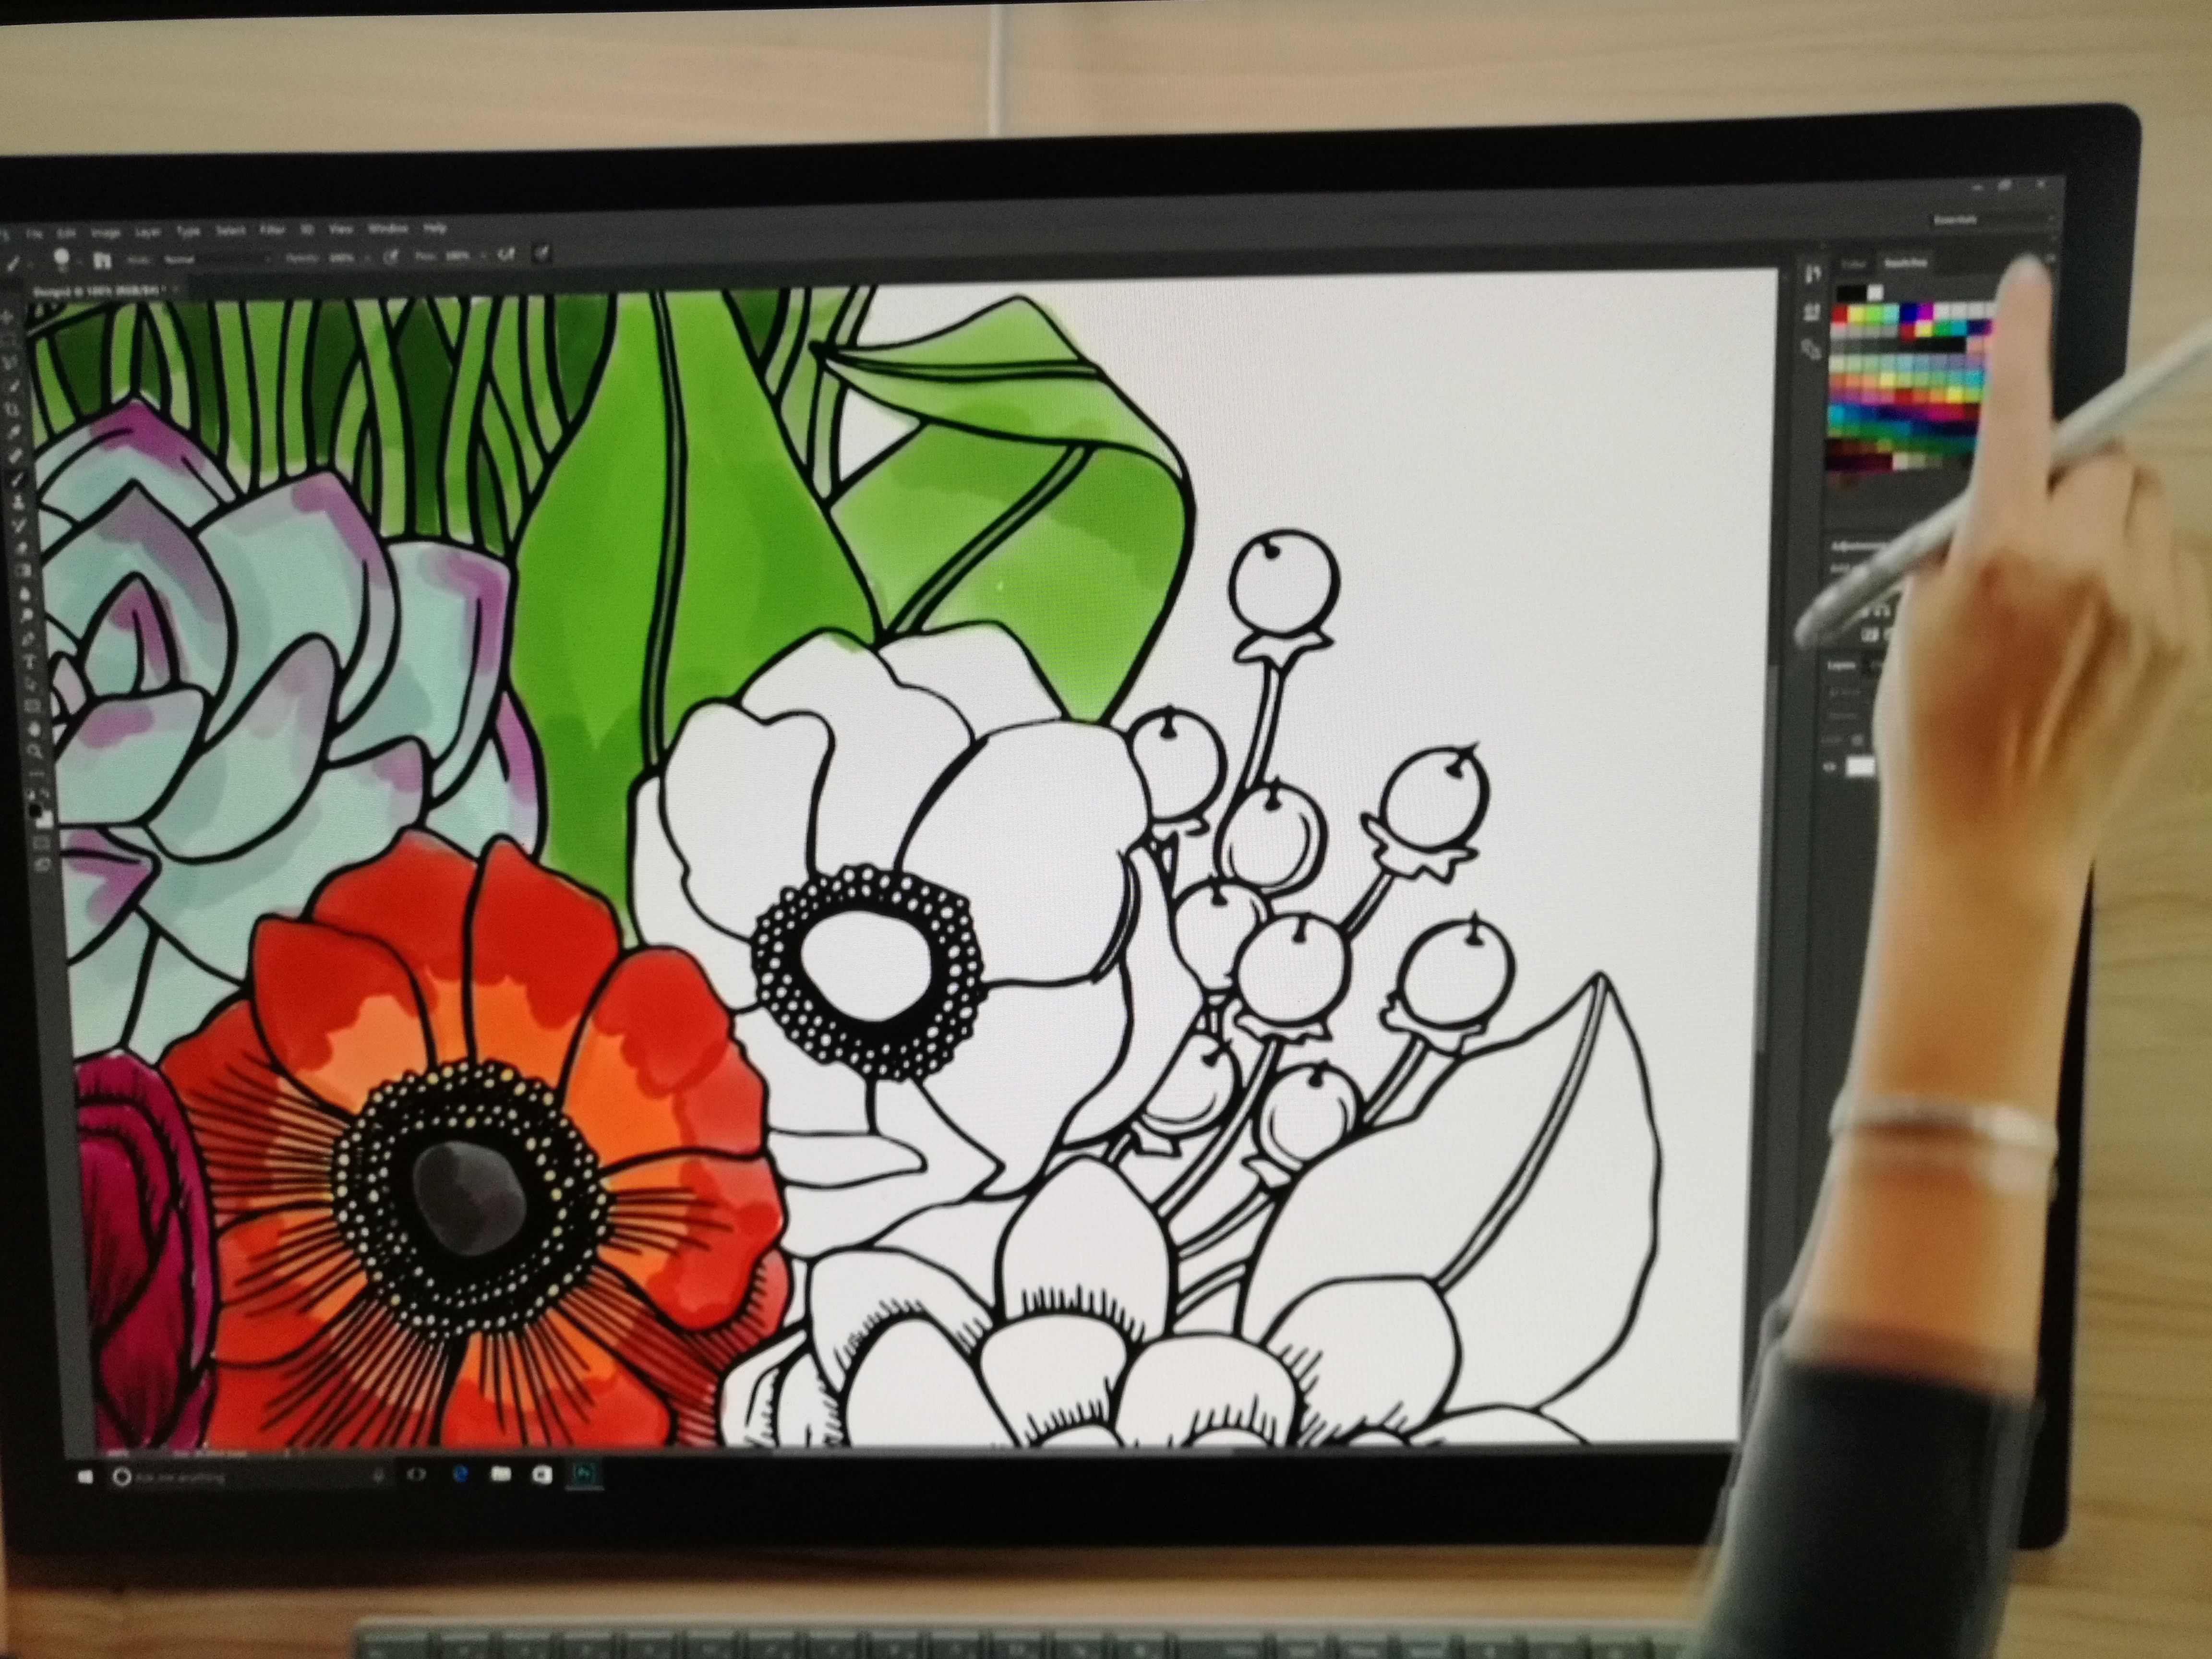 Microsoft Announces the Surface Studio: 28-inch AIO with Touch, Pen,  4500x3000, Skylake, GTX 980M